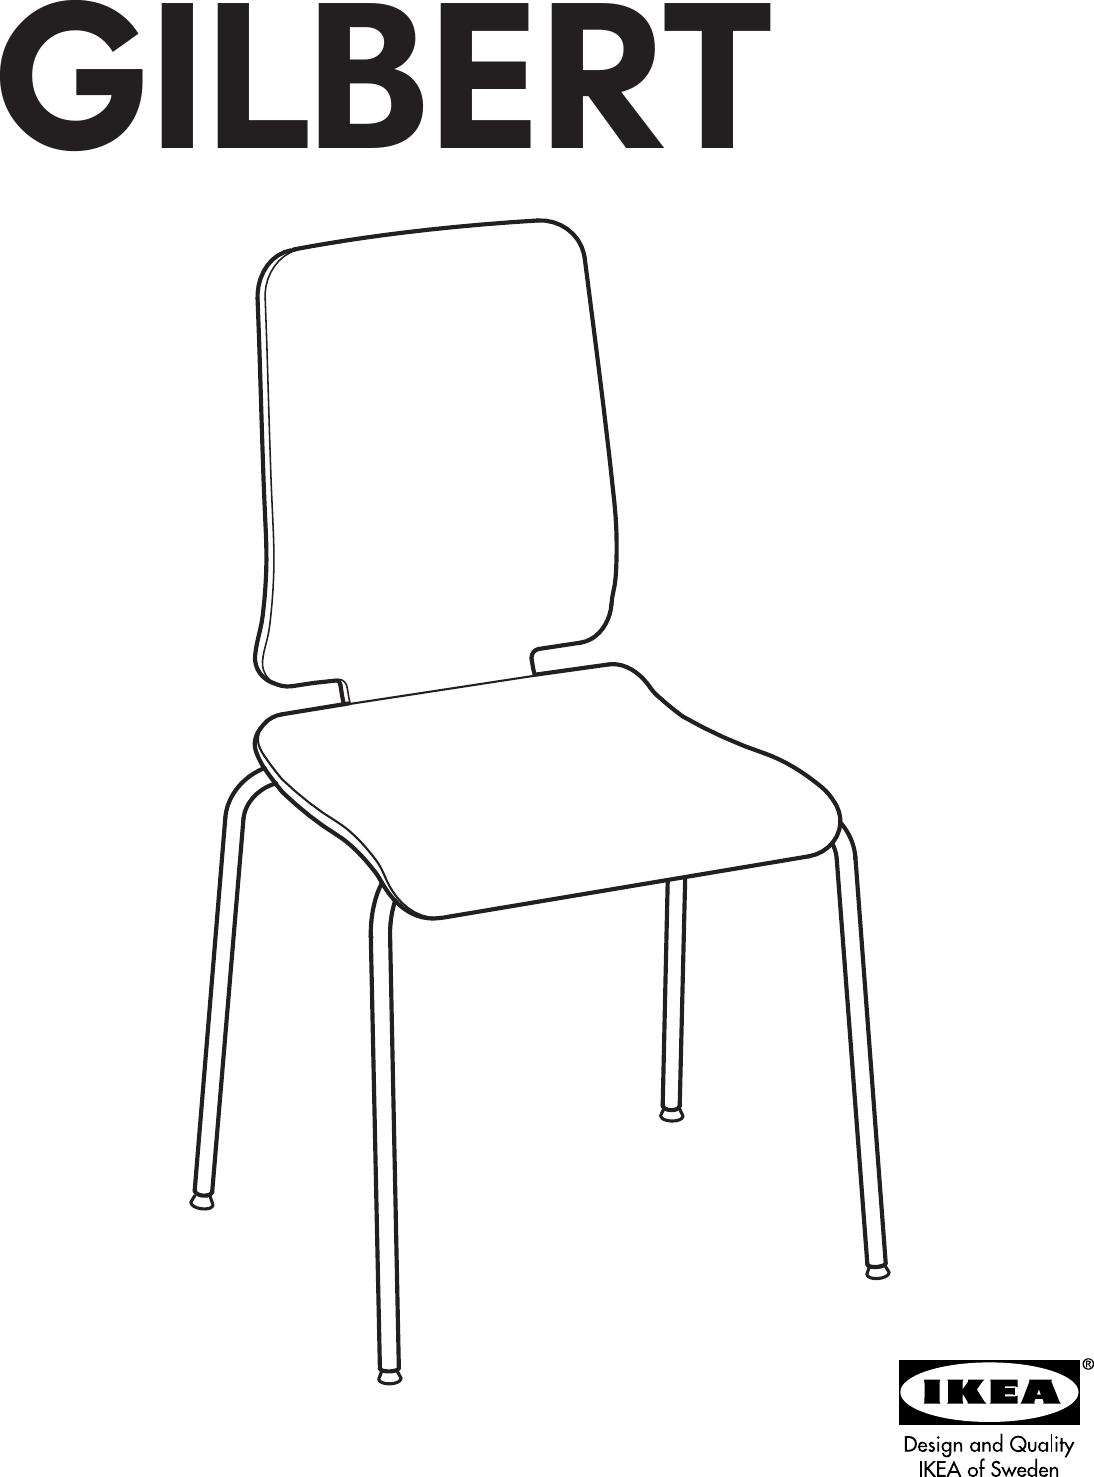 Page 1 of 4 - Ikea Ikea-Gilbert-Chair-Assembly-Instruction